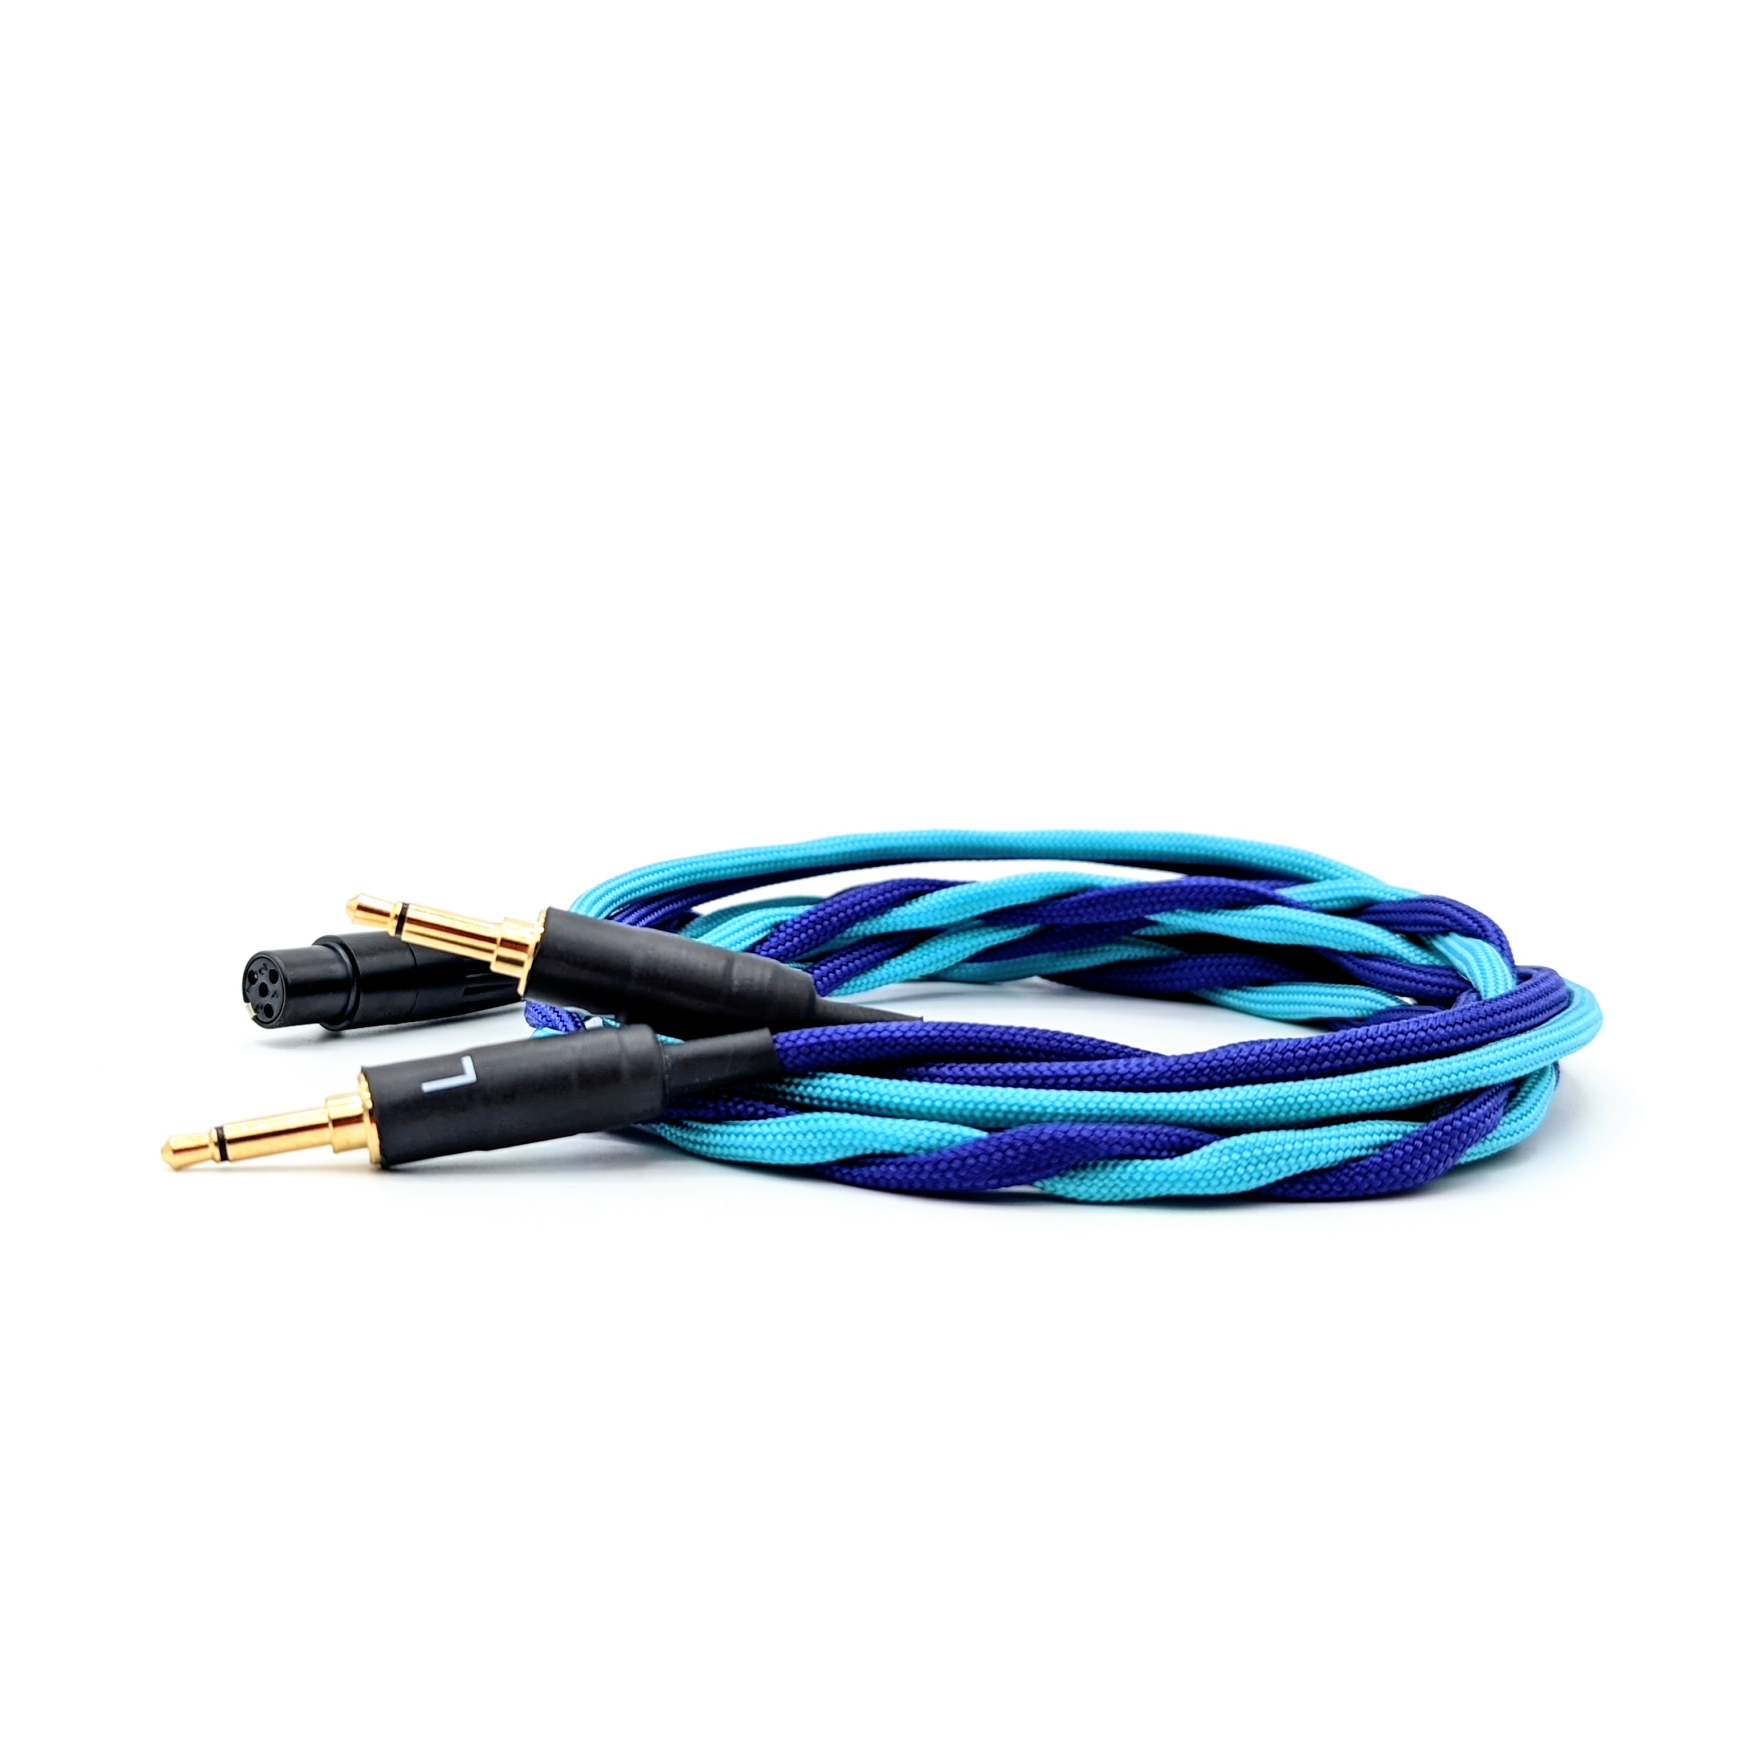 Custom Twisted Braid Dual 3.5mm Headphone Cable for Focal / Hifiman + more